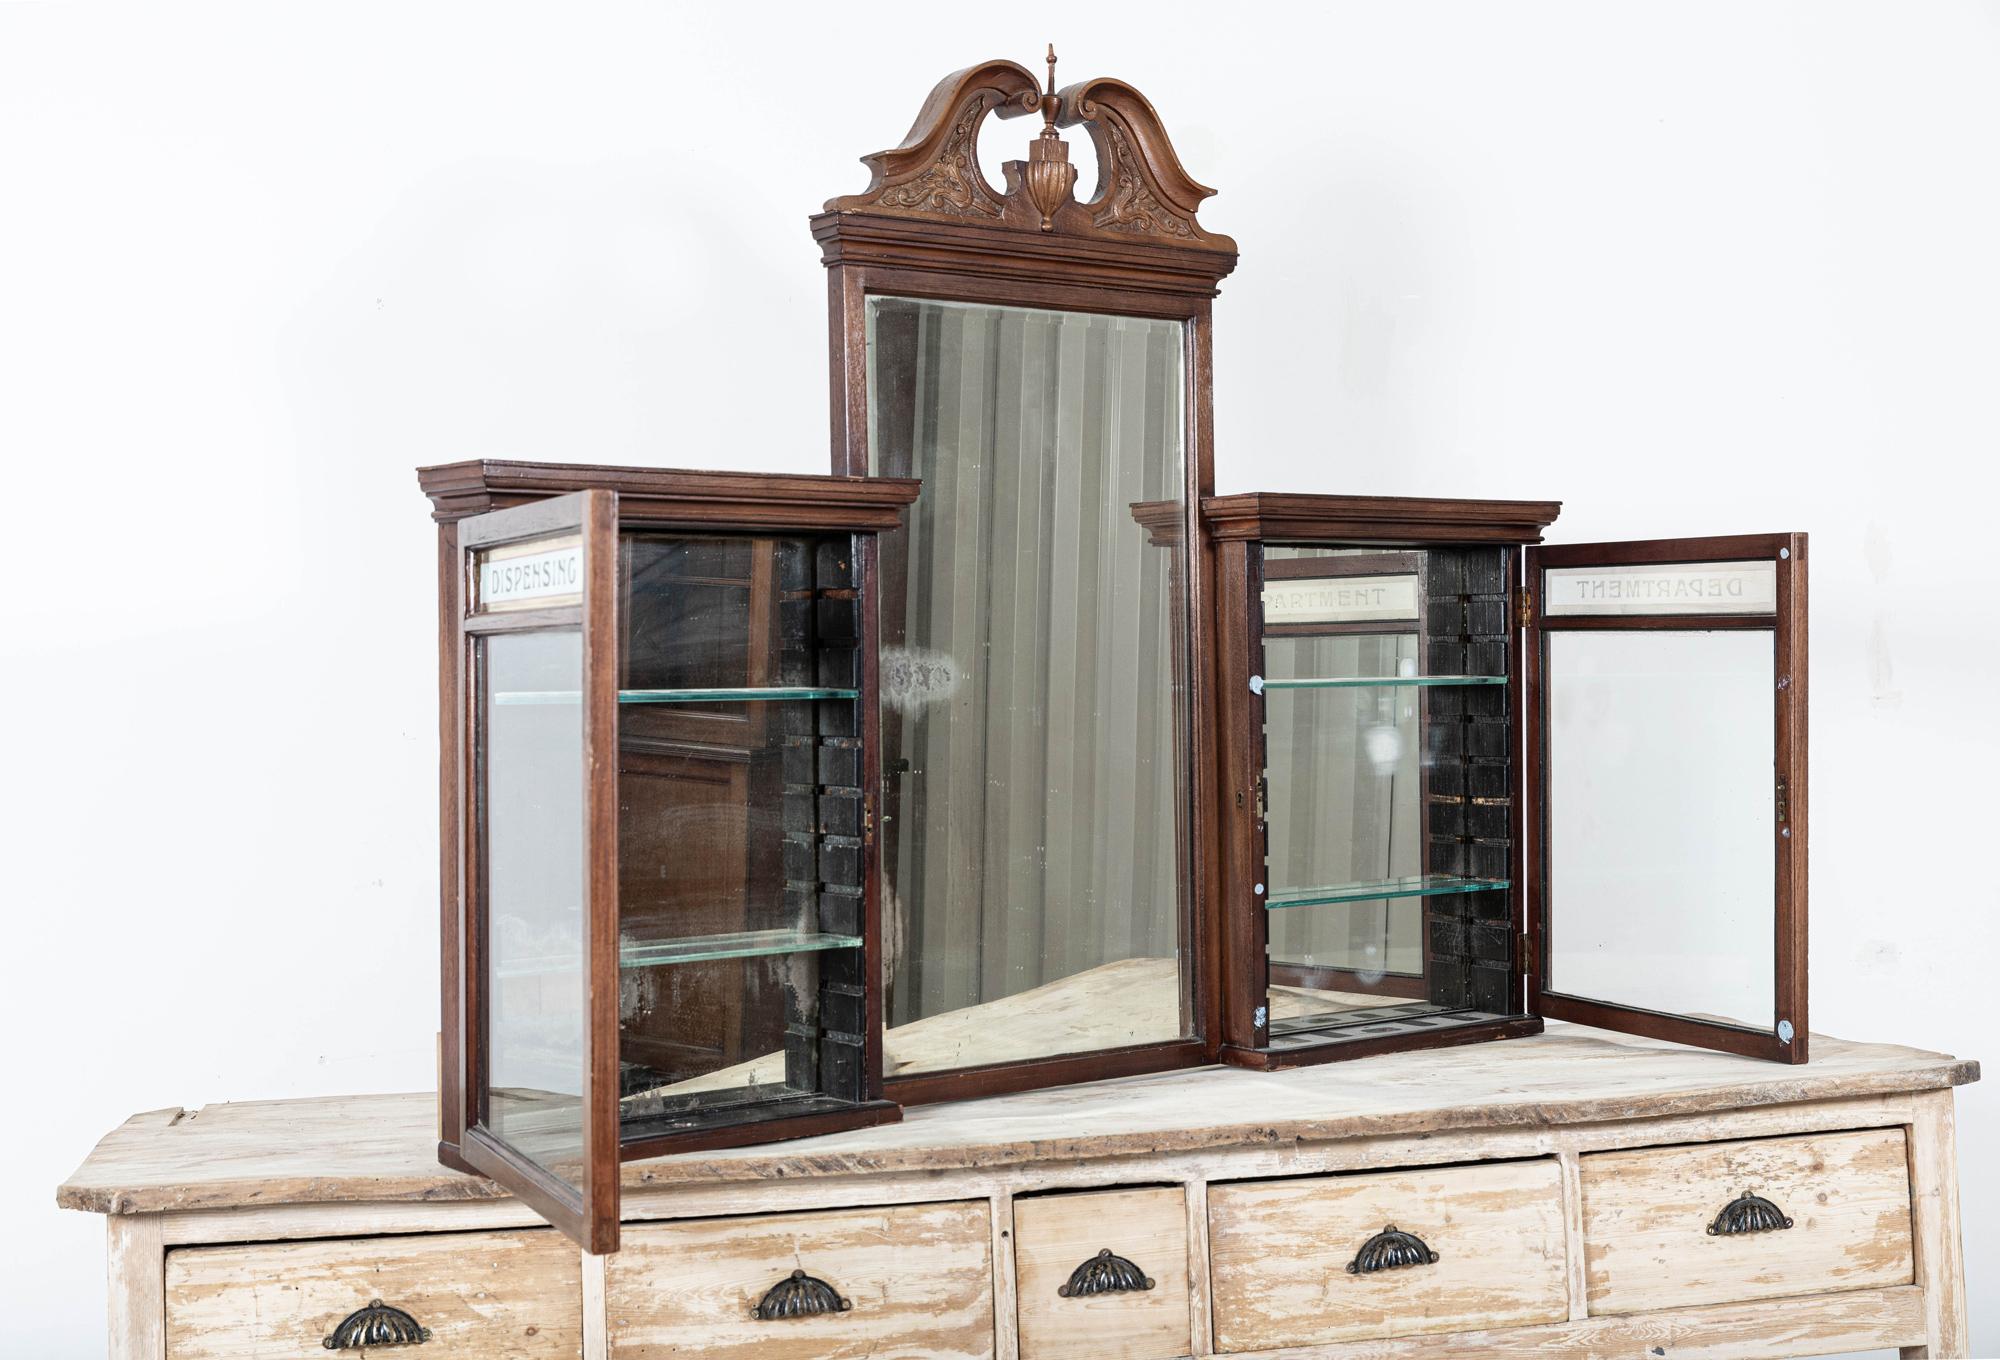 Circa 1860

19thC mahogany pharmacy cabinet from Scotland

An exceptional example with original mirror plate and gilt reverse hand painted detail. Two cabinet doors with internal adjustable glass shelves.

Perfect mounted above a bathroom